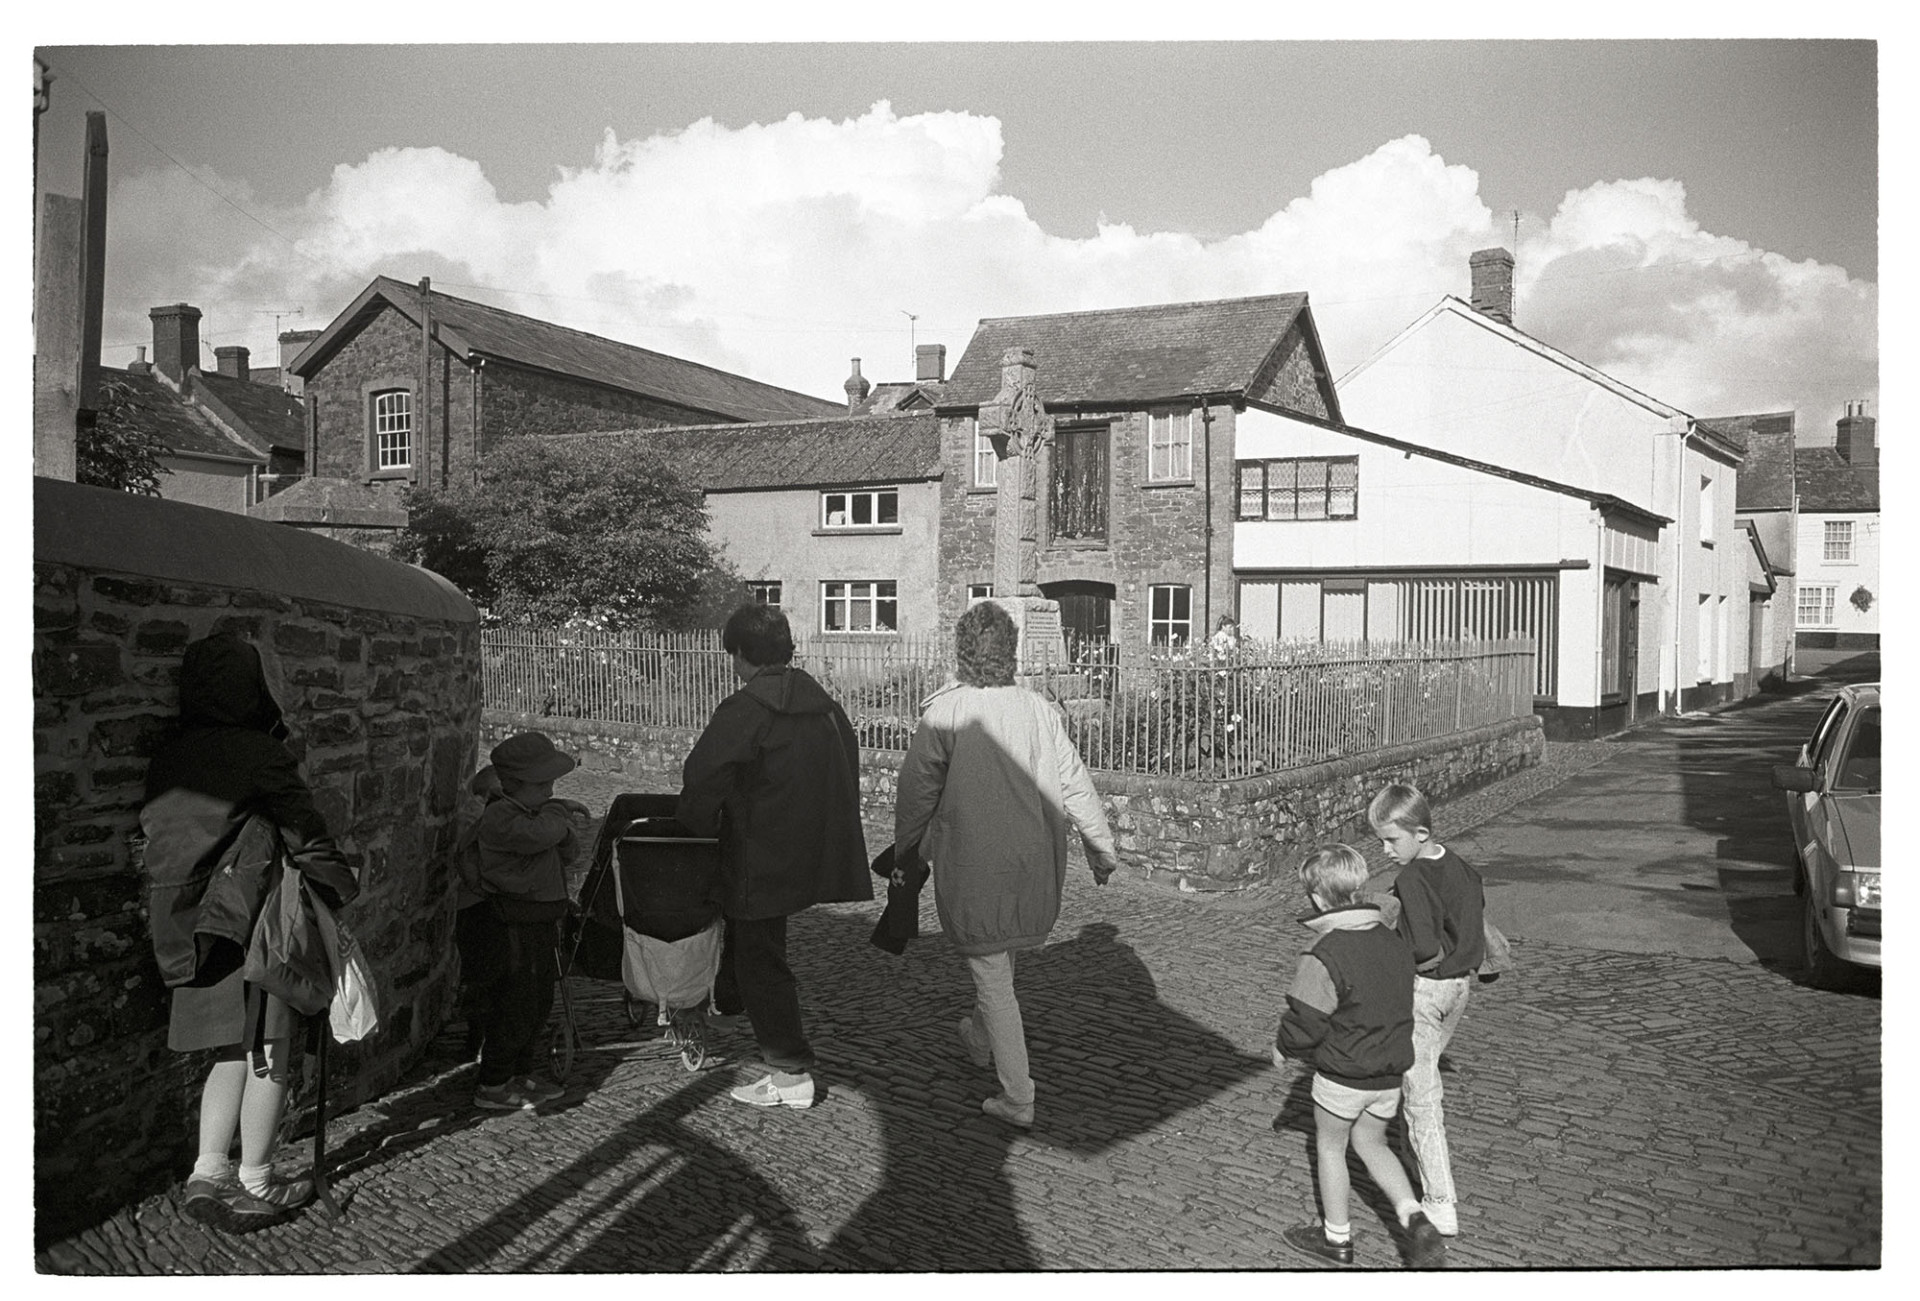 Women, mothers and children after school. clouds in background. 
[Mothers and children walking home from school along a cobbled street in Chulmleigh. They are walking past the war memorial. Clouds can be seen in the sky in the background.]